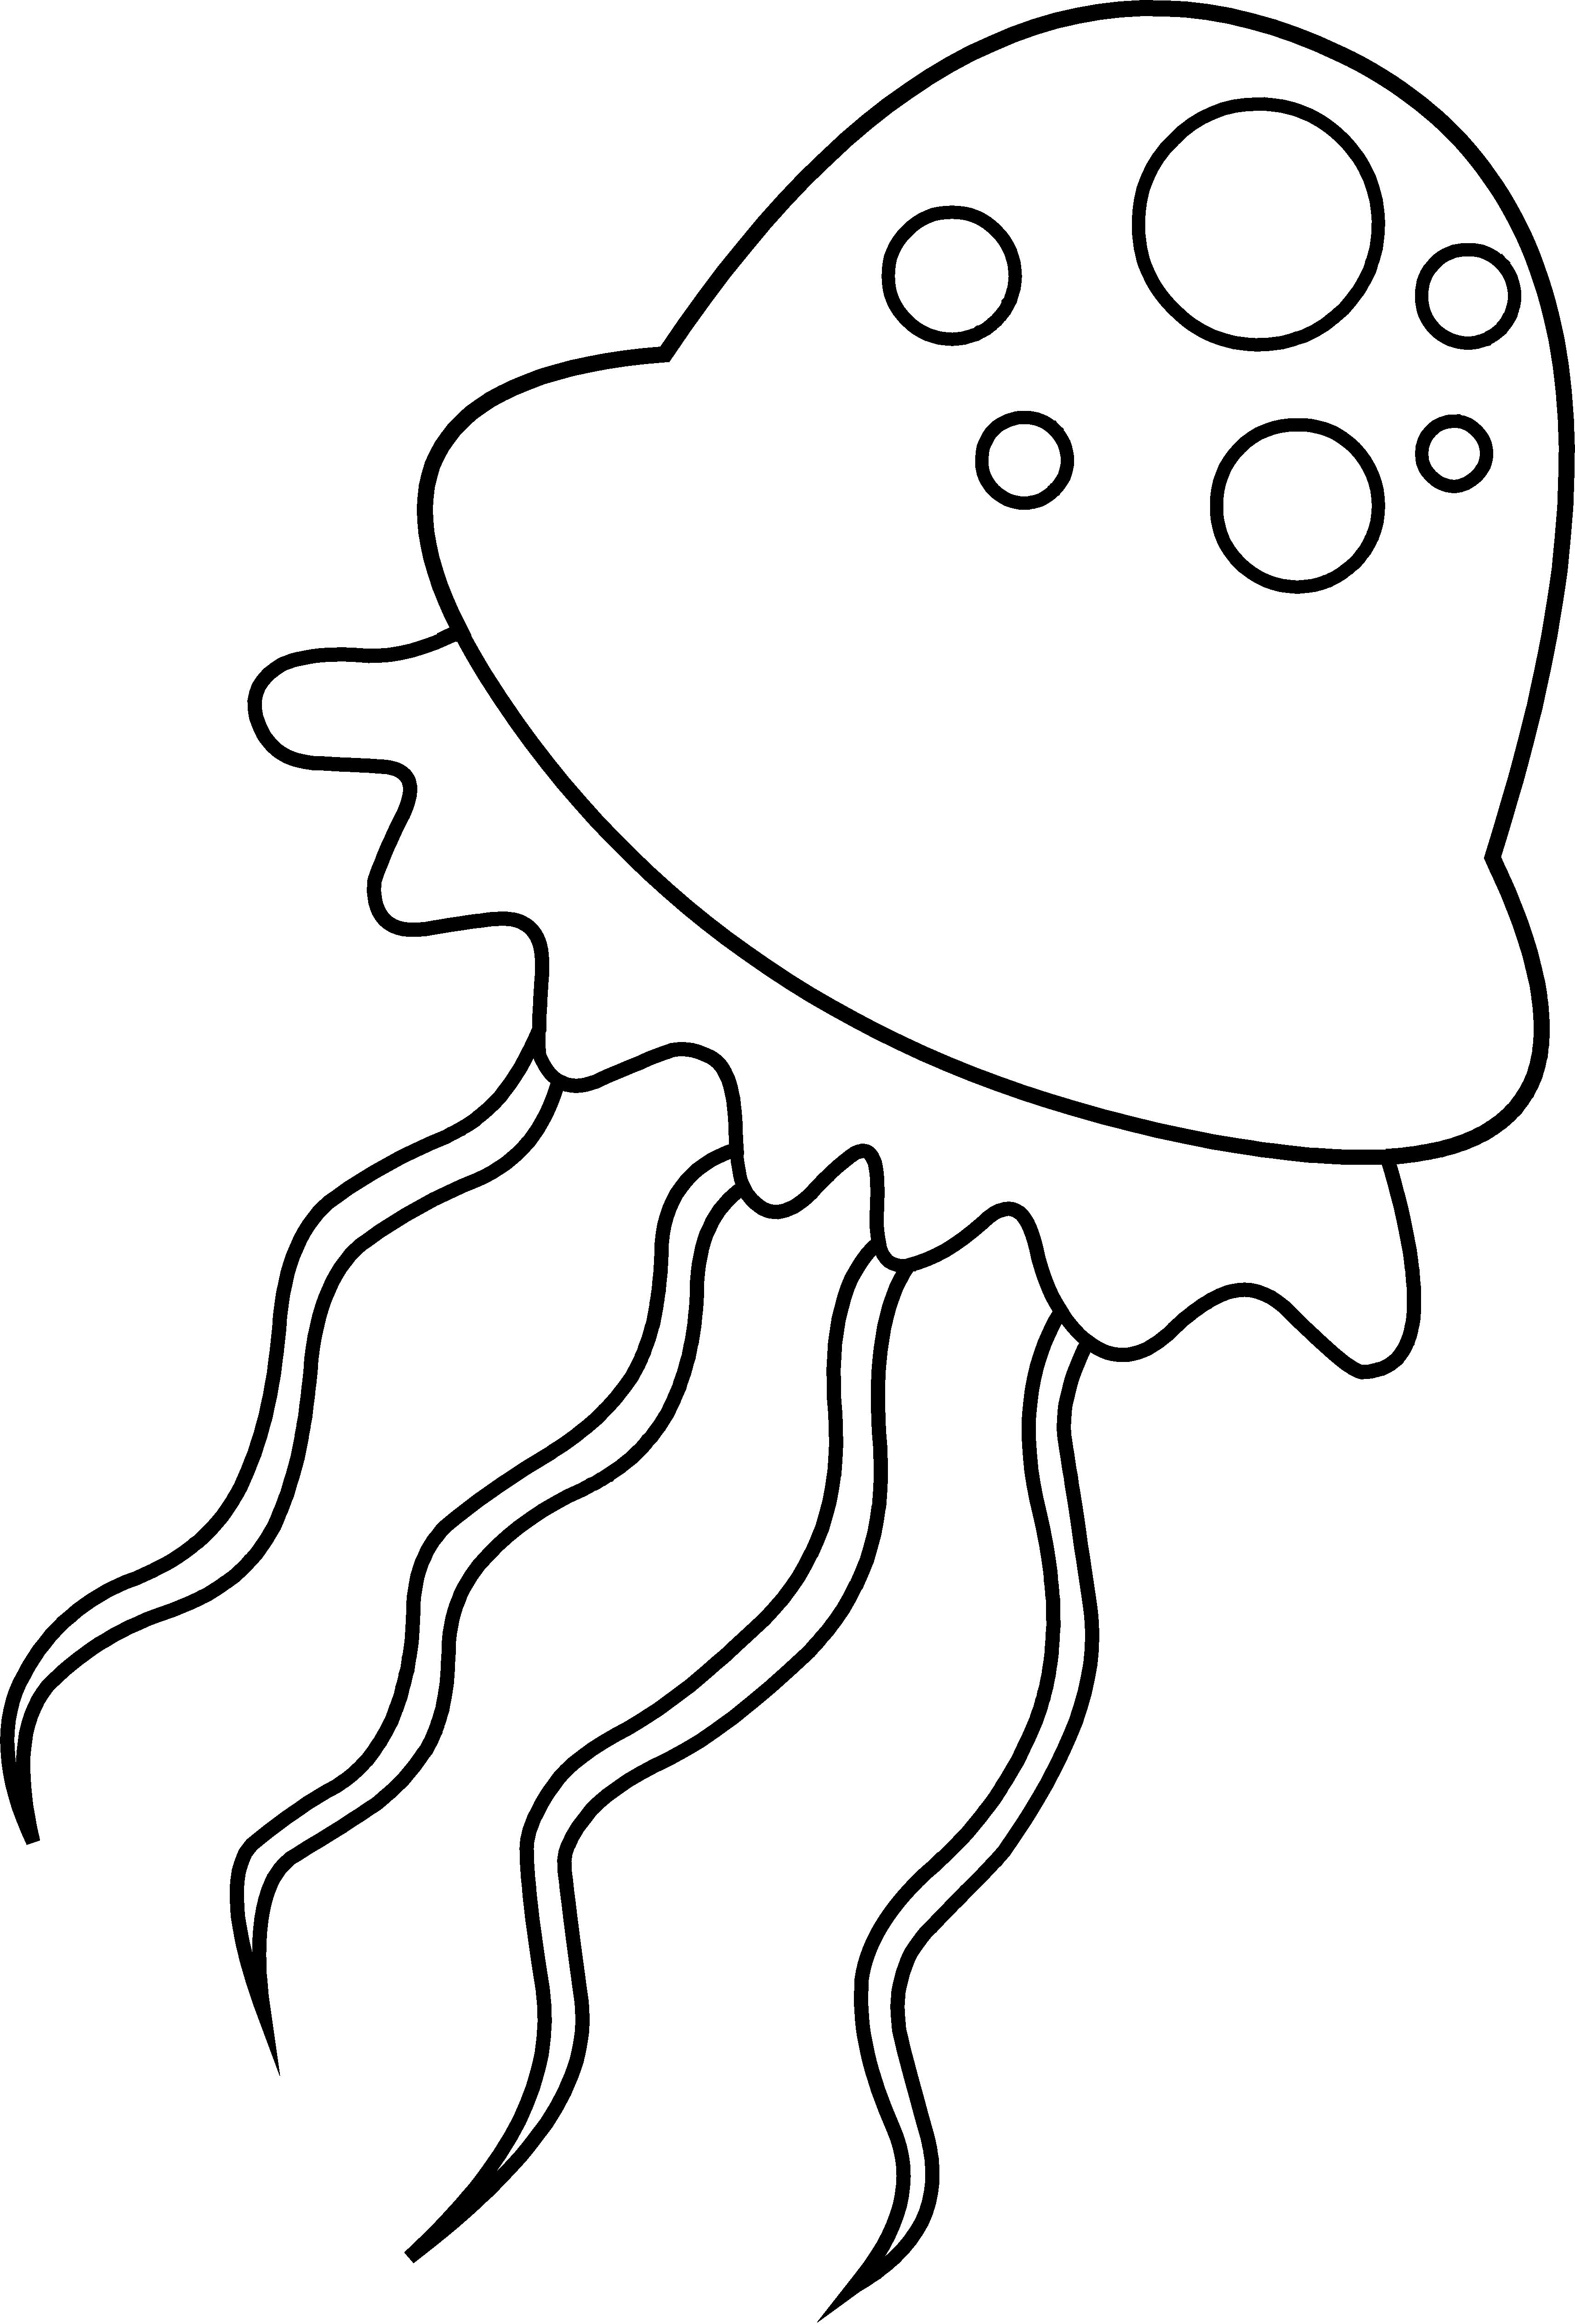 Jellyfish free clip art. Waves clipart coloring page